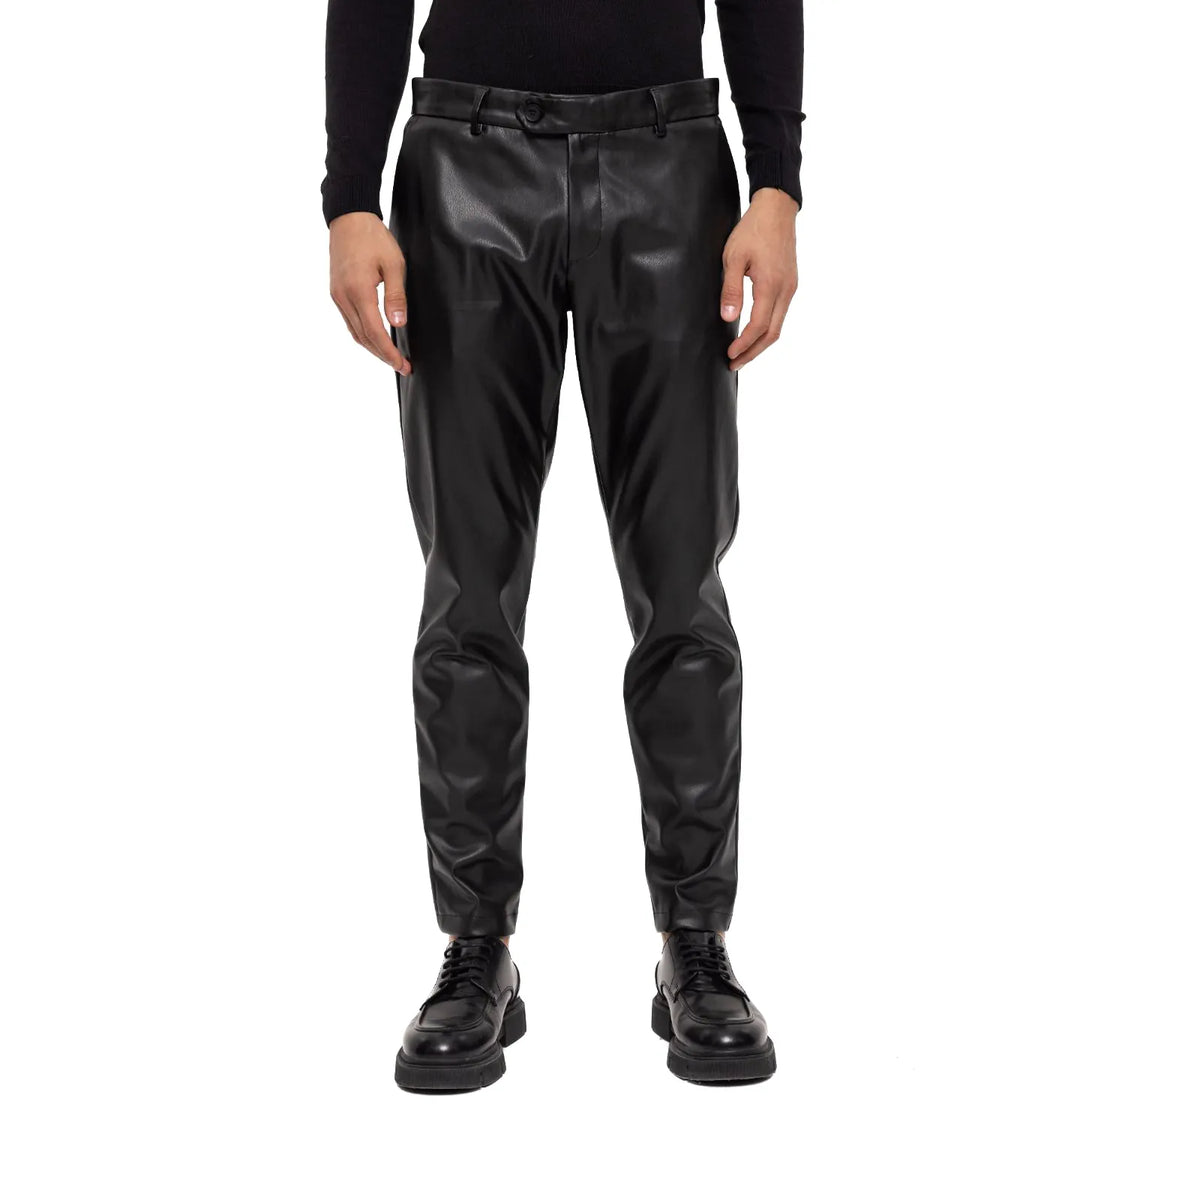 Men's leather pants - Quality products with free shipping | only on  AliExpress